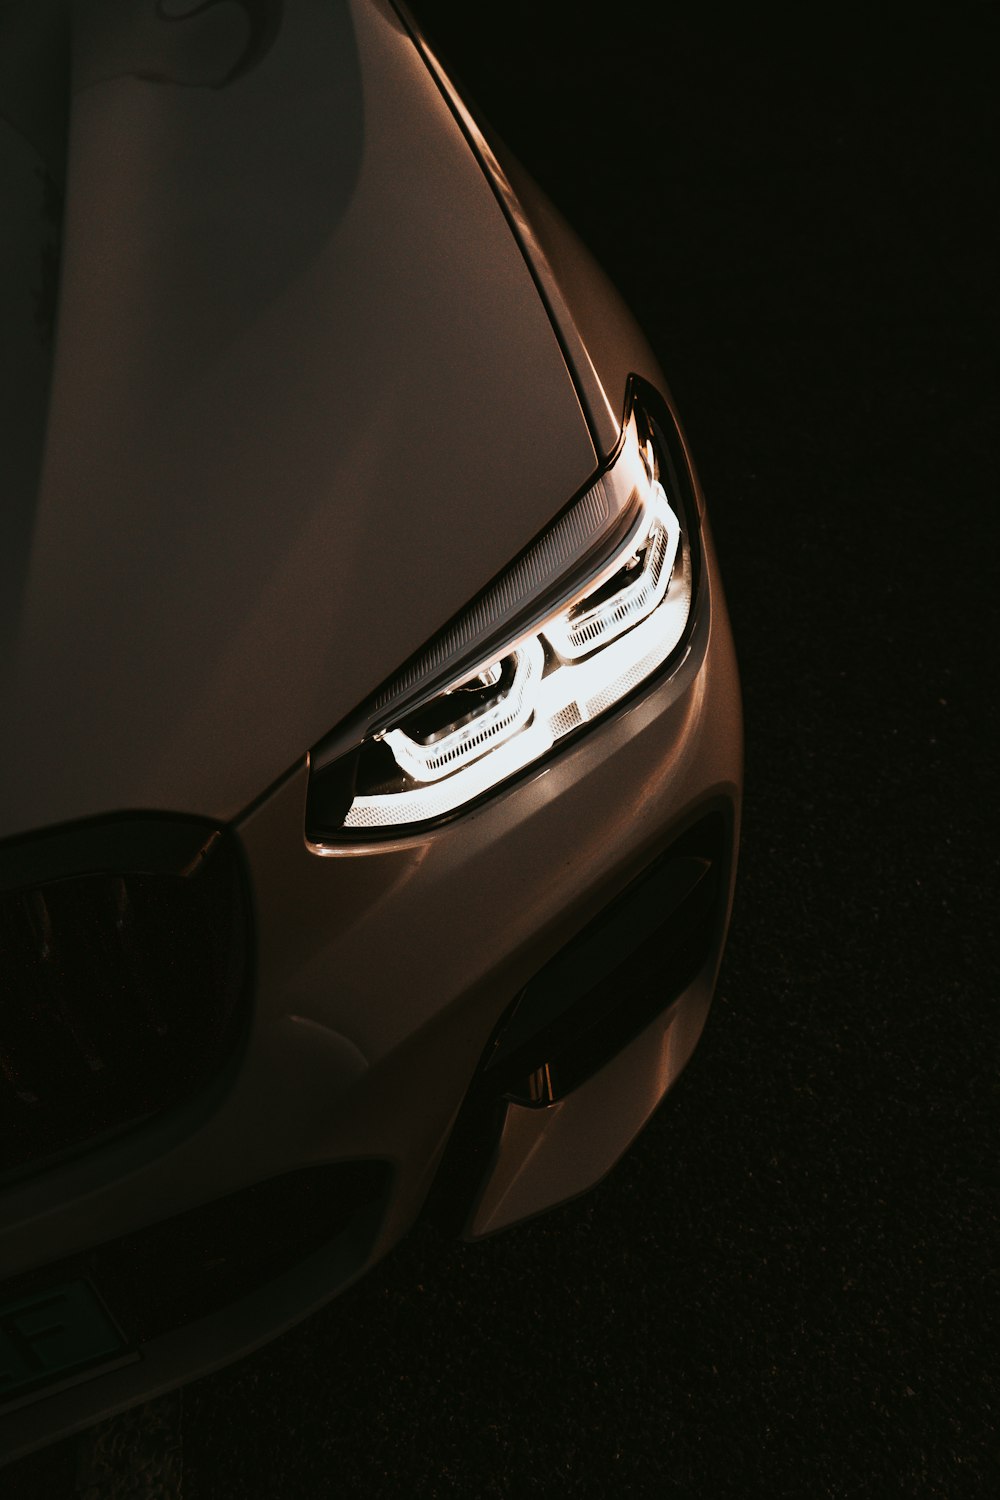 a close up of the headlights of a car